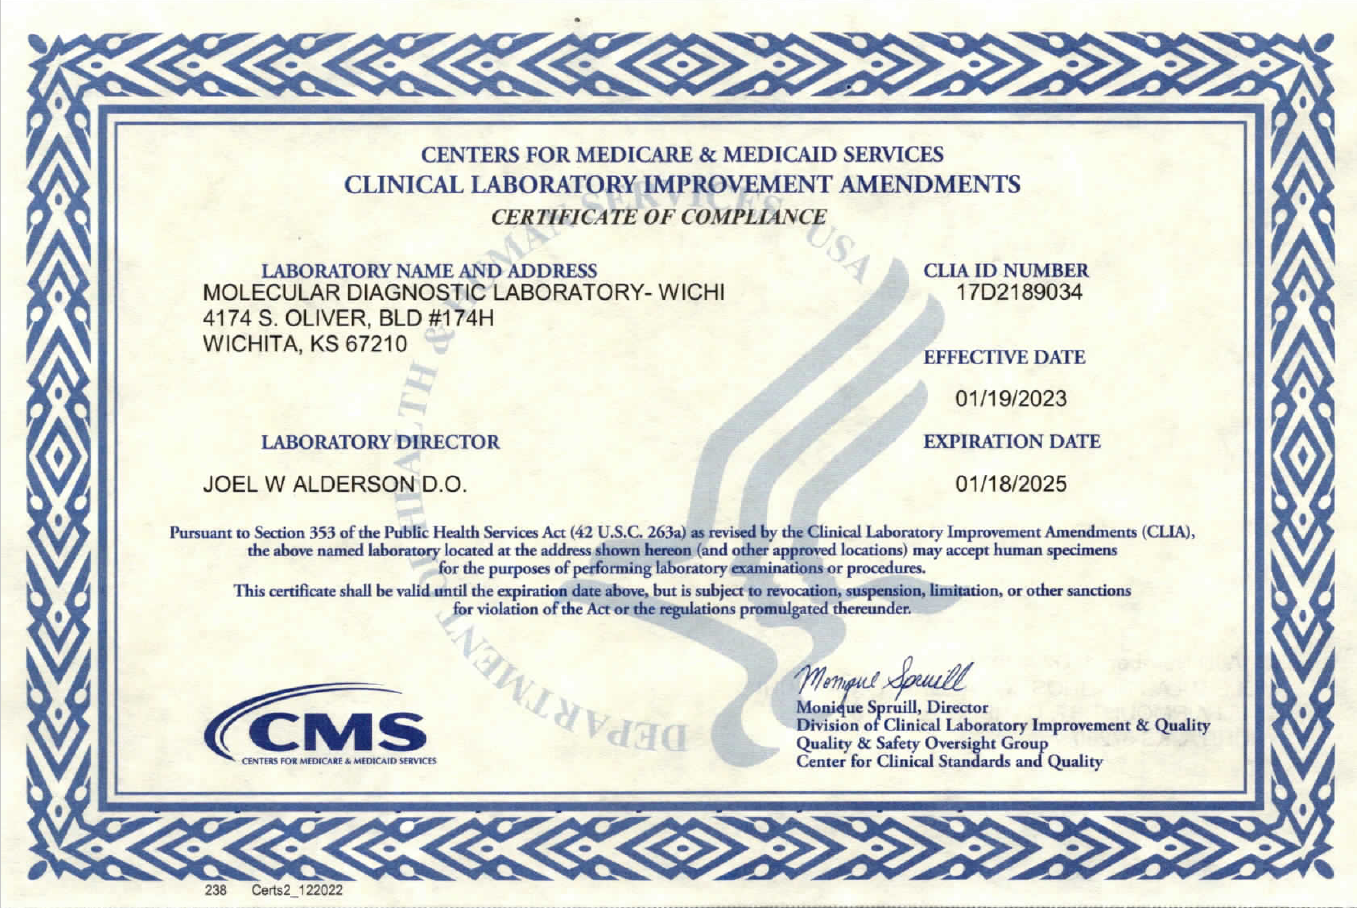 MDL's CLIA certification. This certificate is valid from January 19, 2023 to January 18, 2025